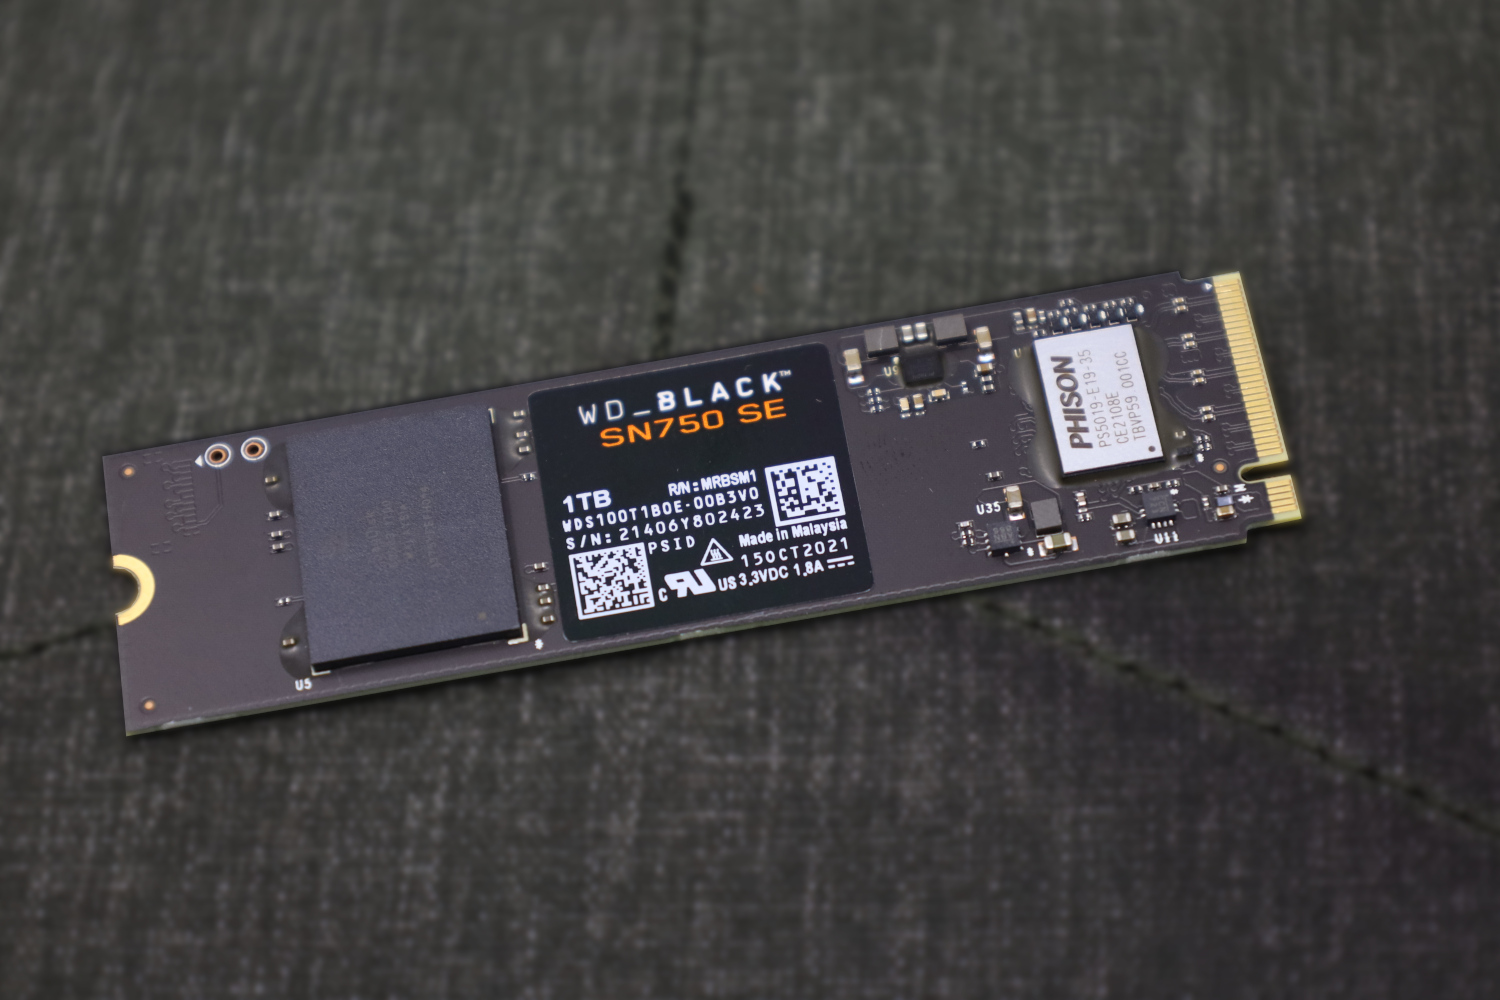 WD Black SN770 review: just short of SSD greatness